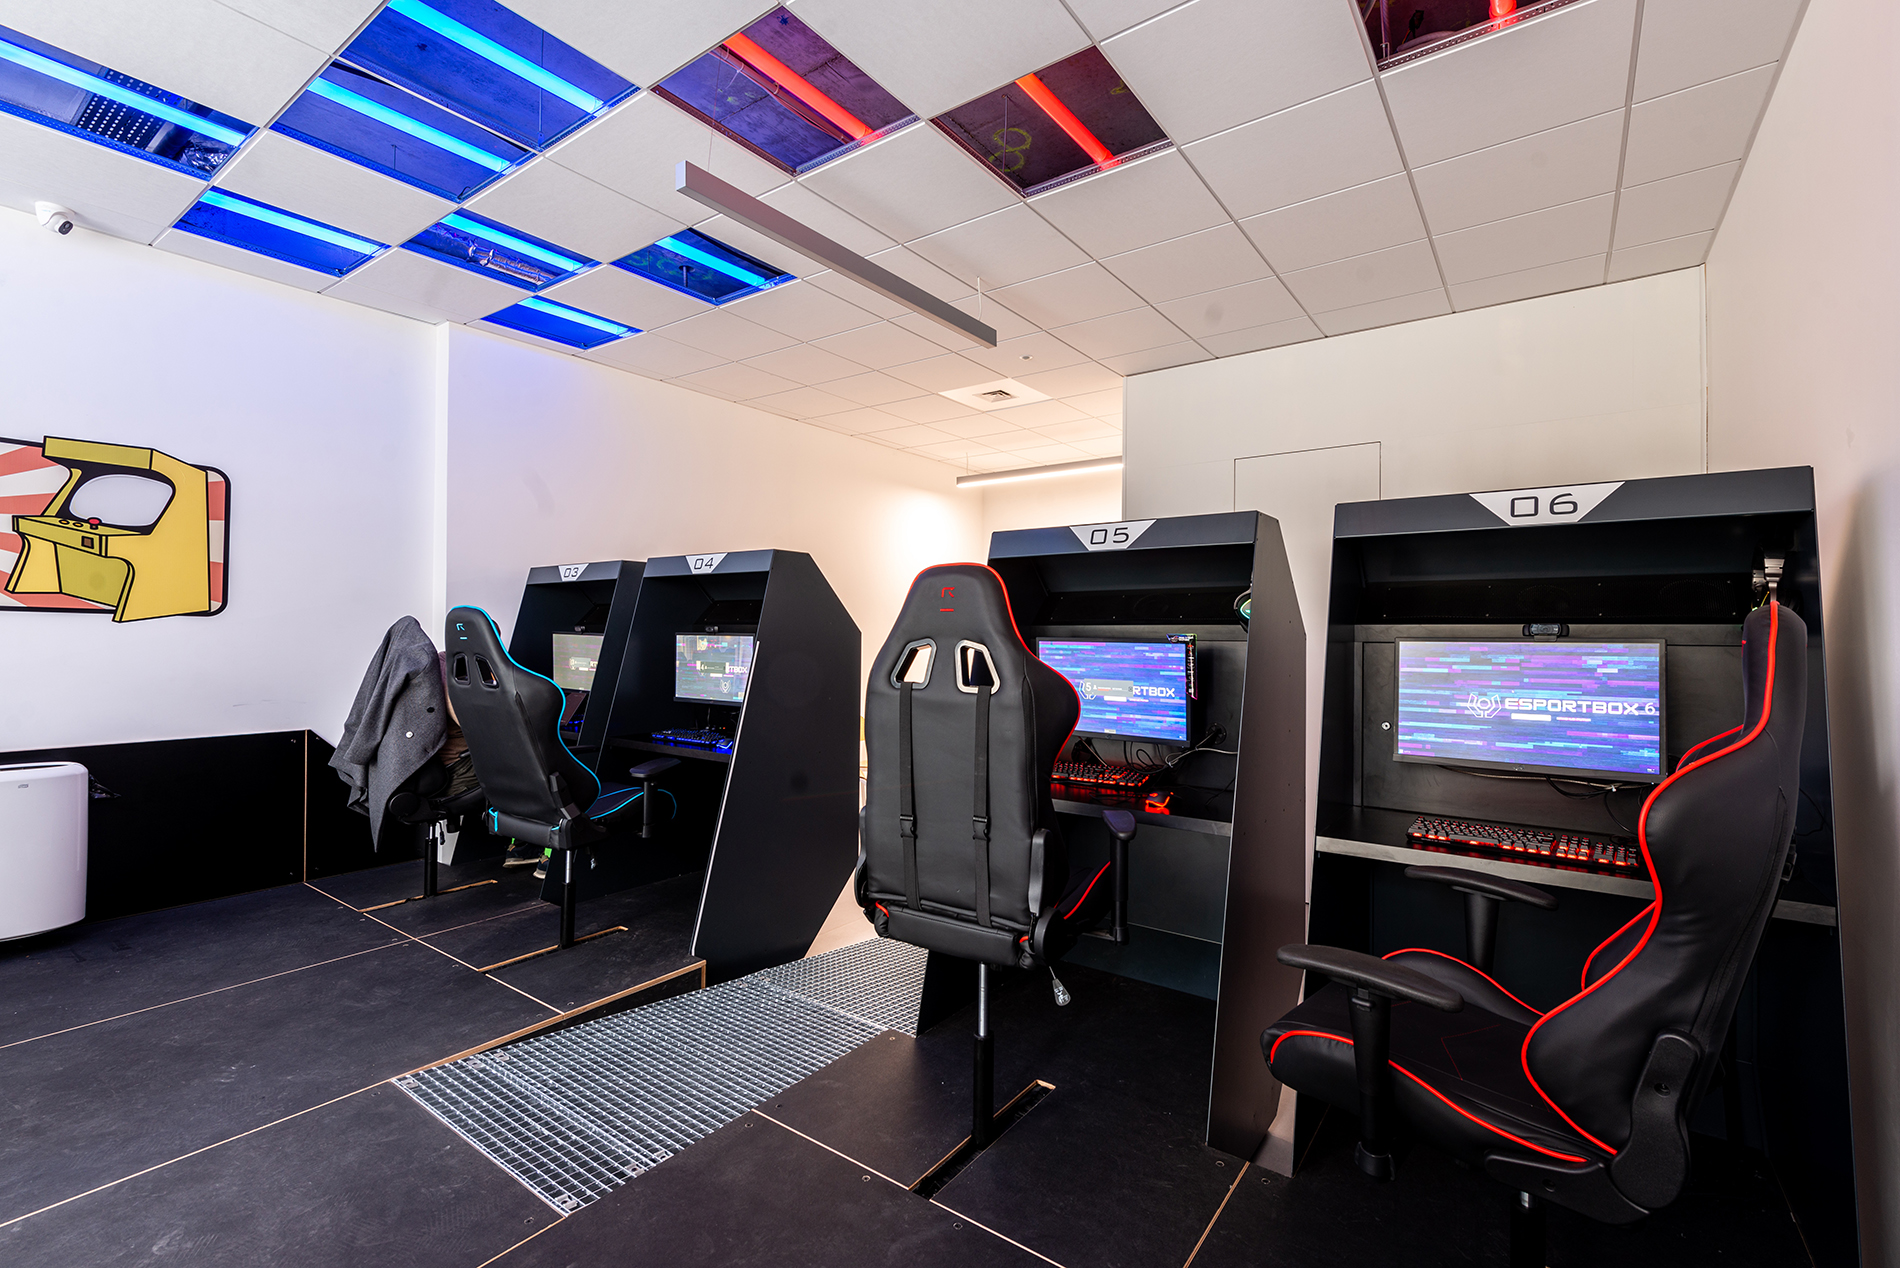 Combien Coute une Chambre Gaming ?